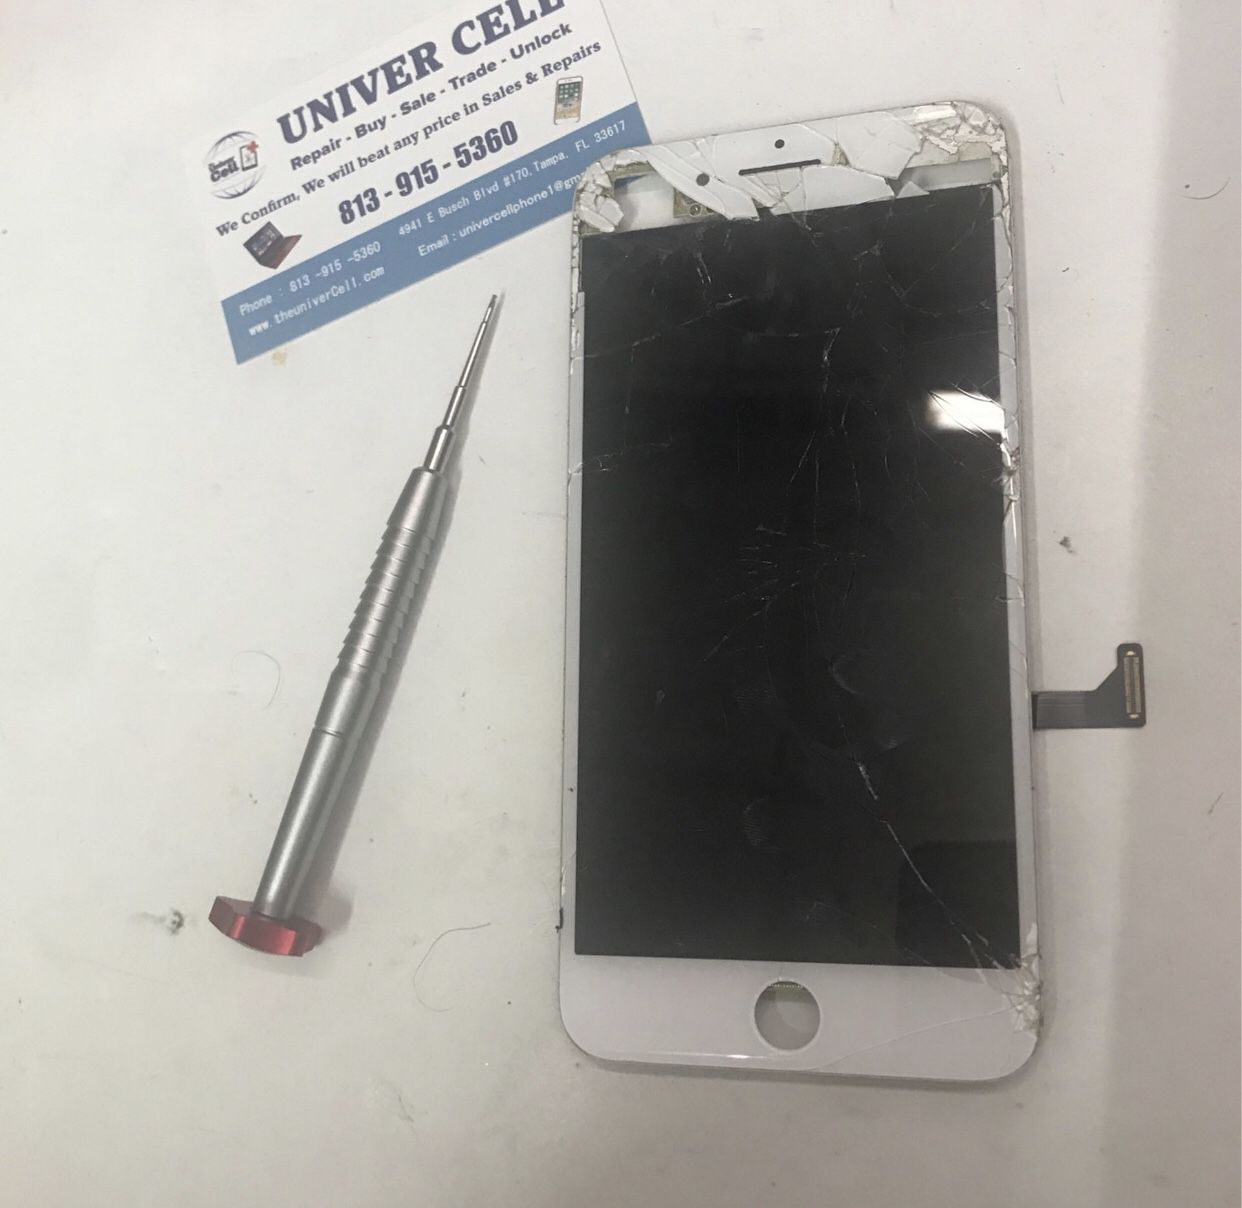 New Screens With LCD for All iPhones Can Be Done In 10 minutes Just $19 Plus Part @ Univercell 4941 E Busch Blvd #170 Tampa 33617